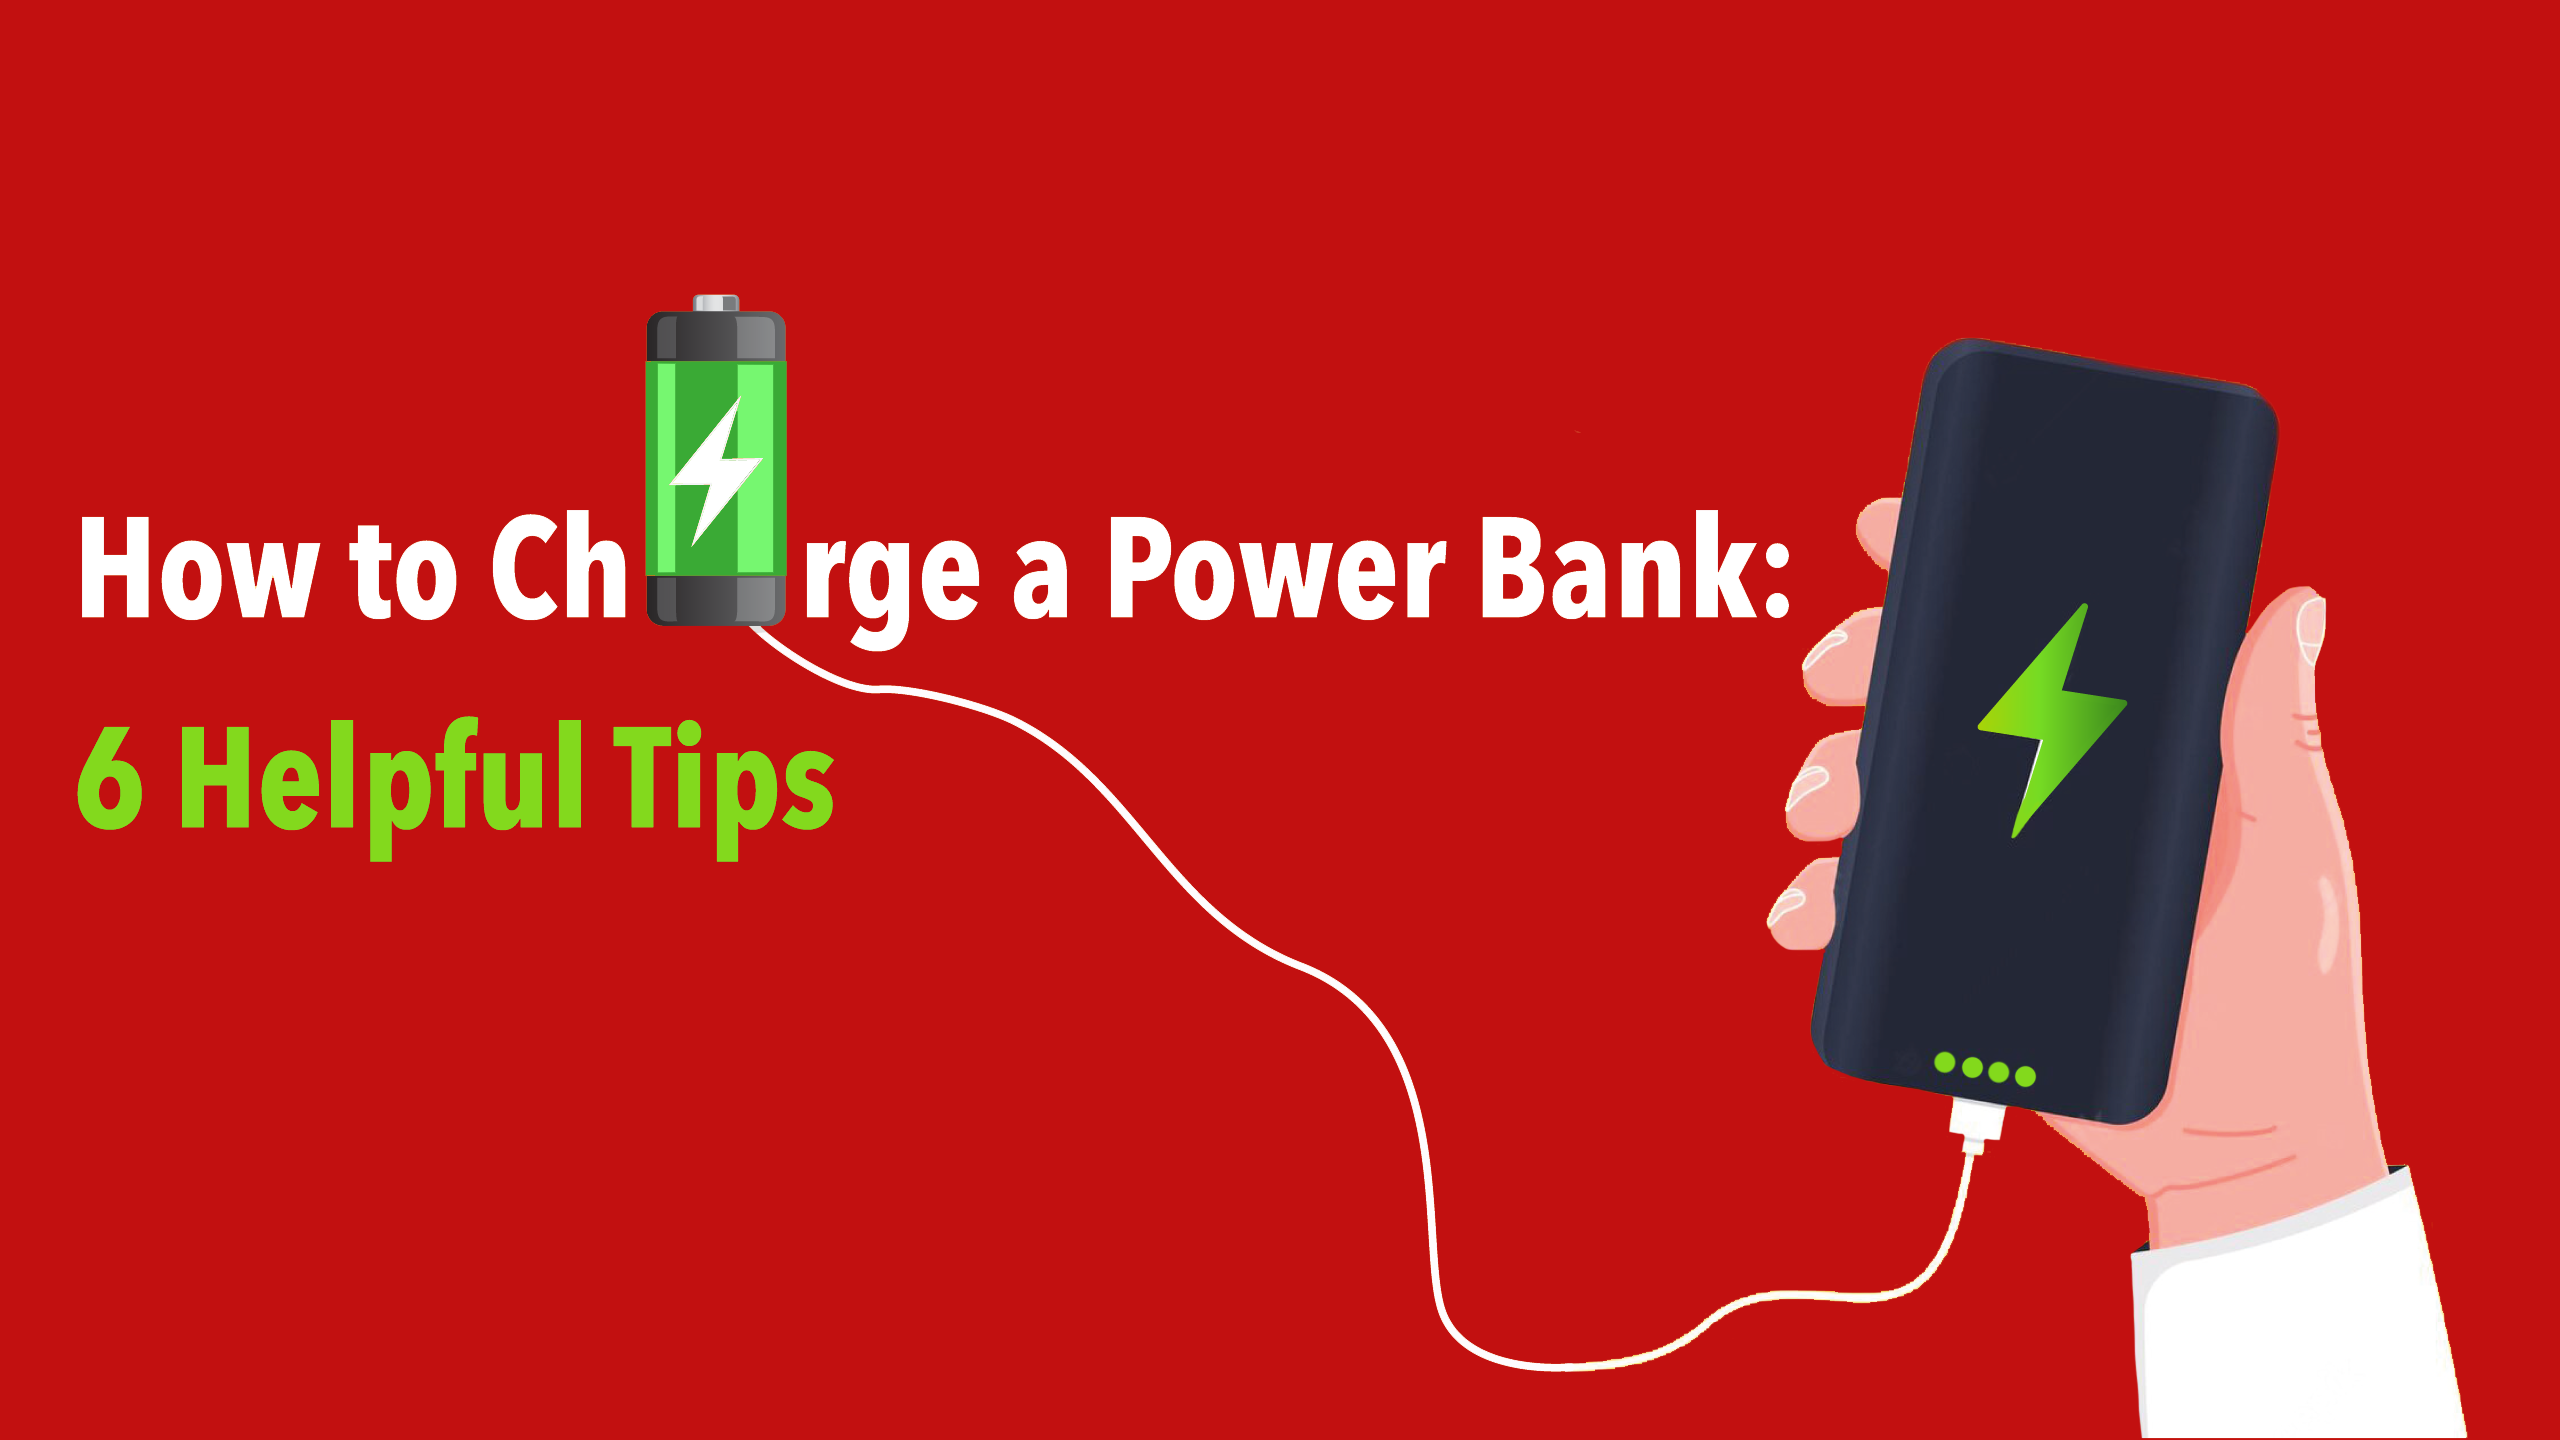 winkel Mam Ladder How To Charge a Power Bank: 6 Helpful Tips